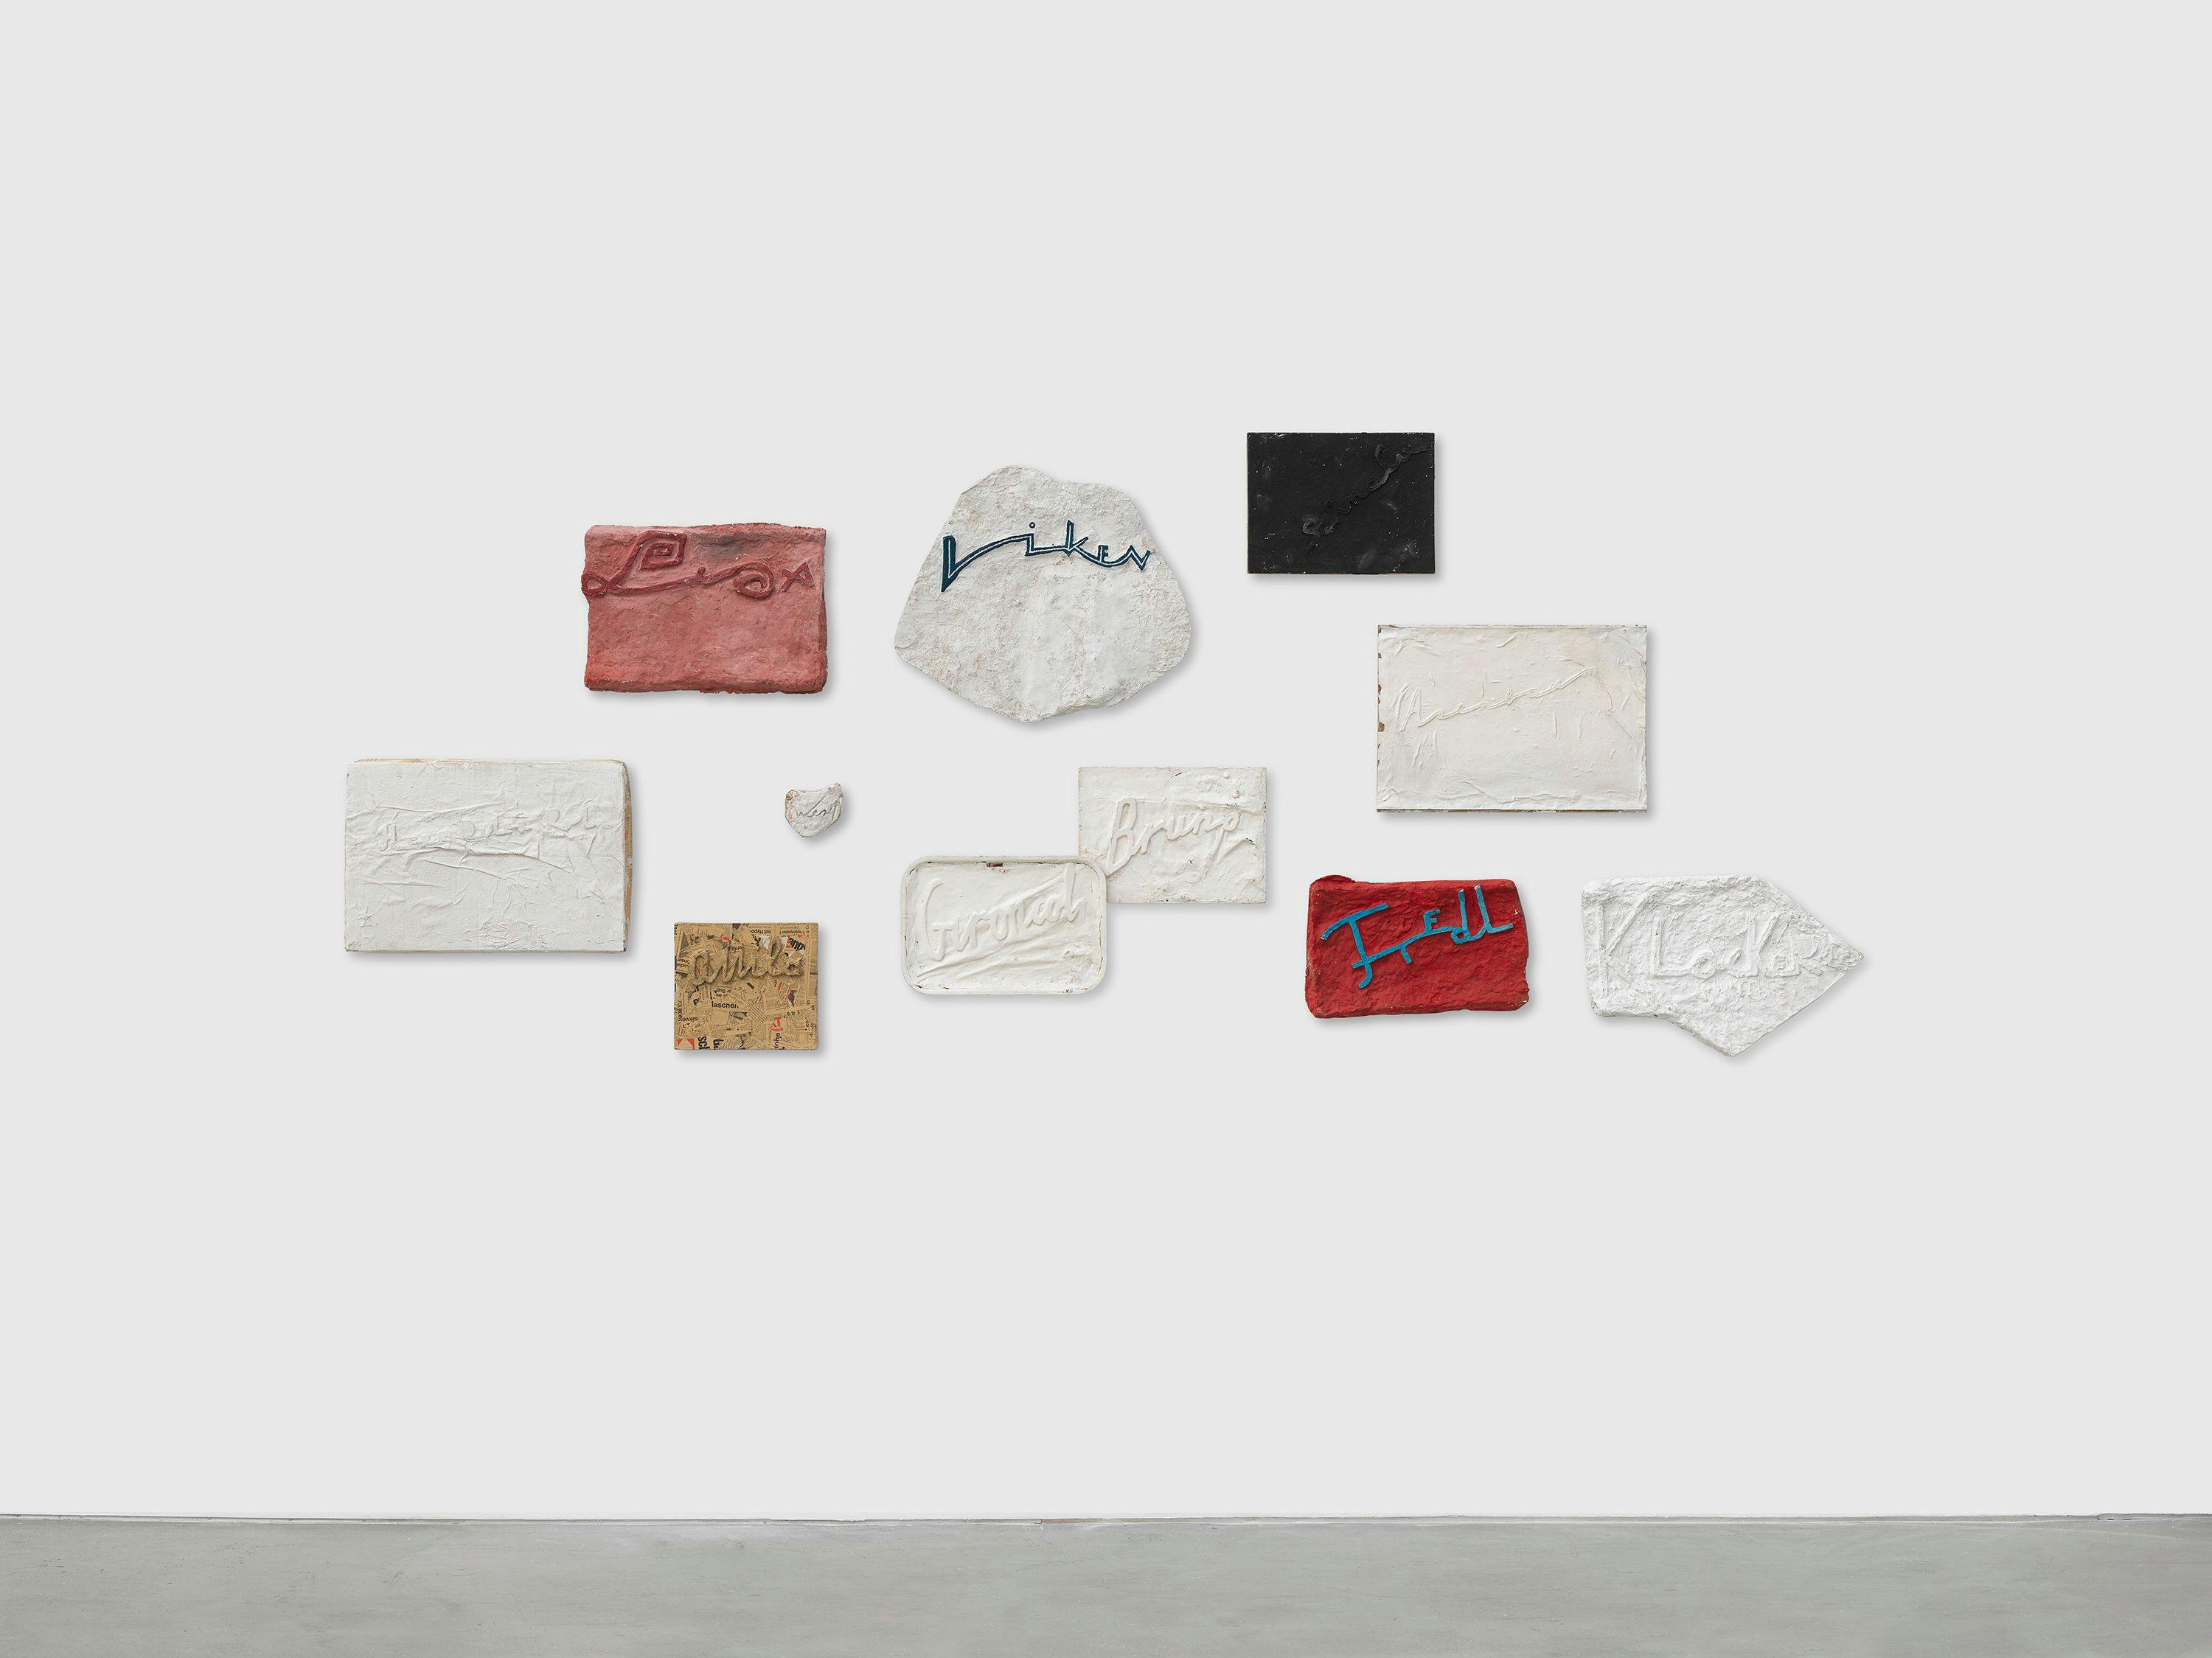 A mixed media wall installation by Franz West, titled Namensbilder, dated 1974 to 1985.